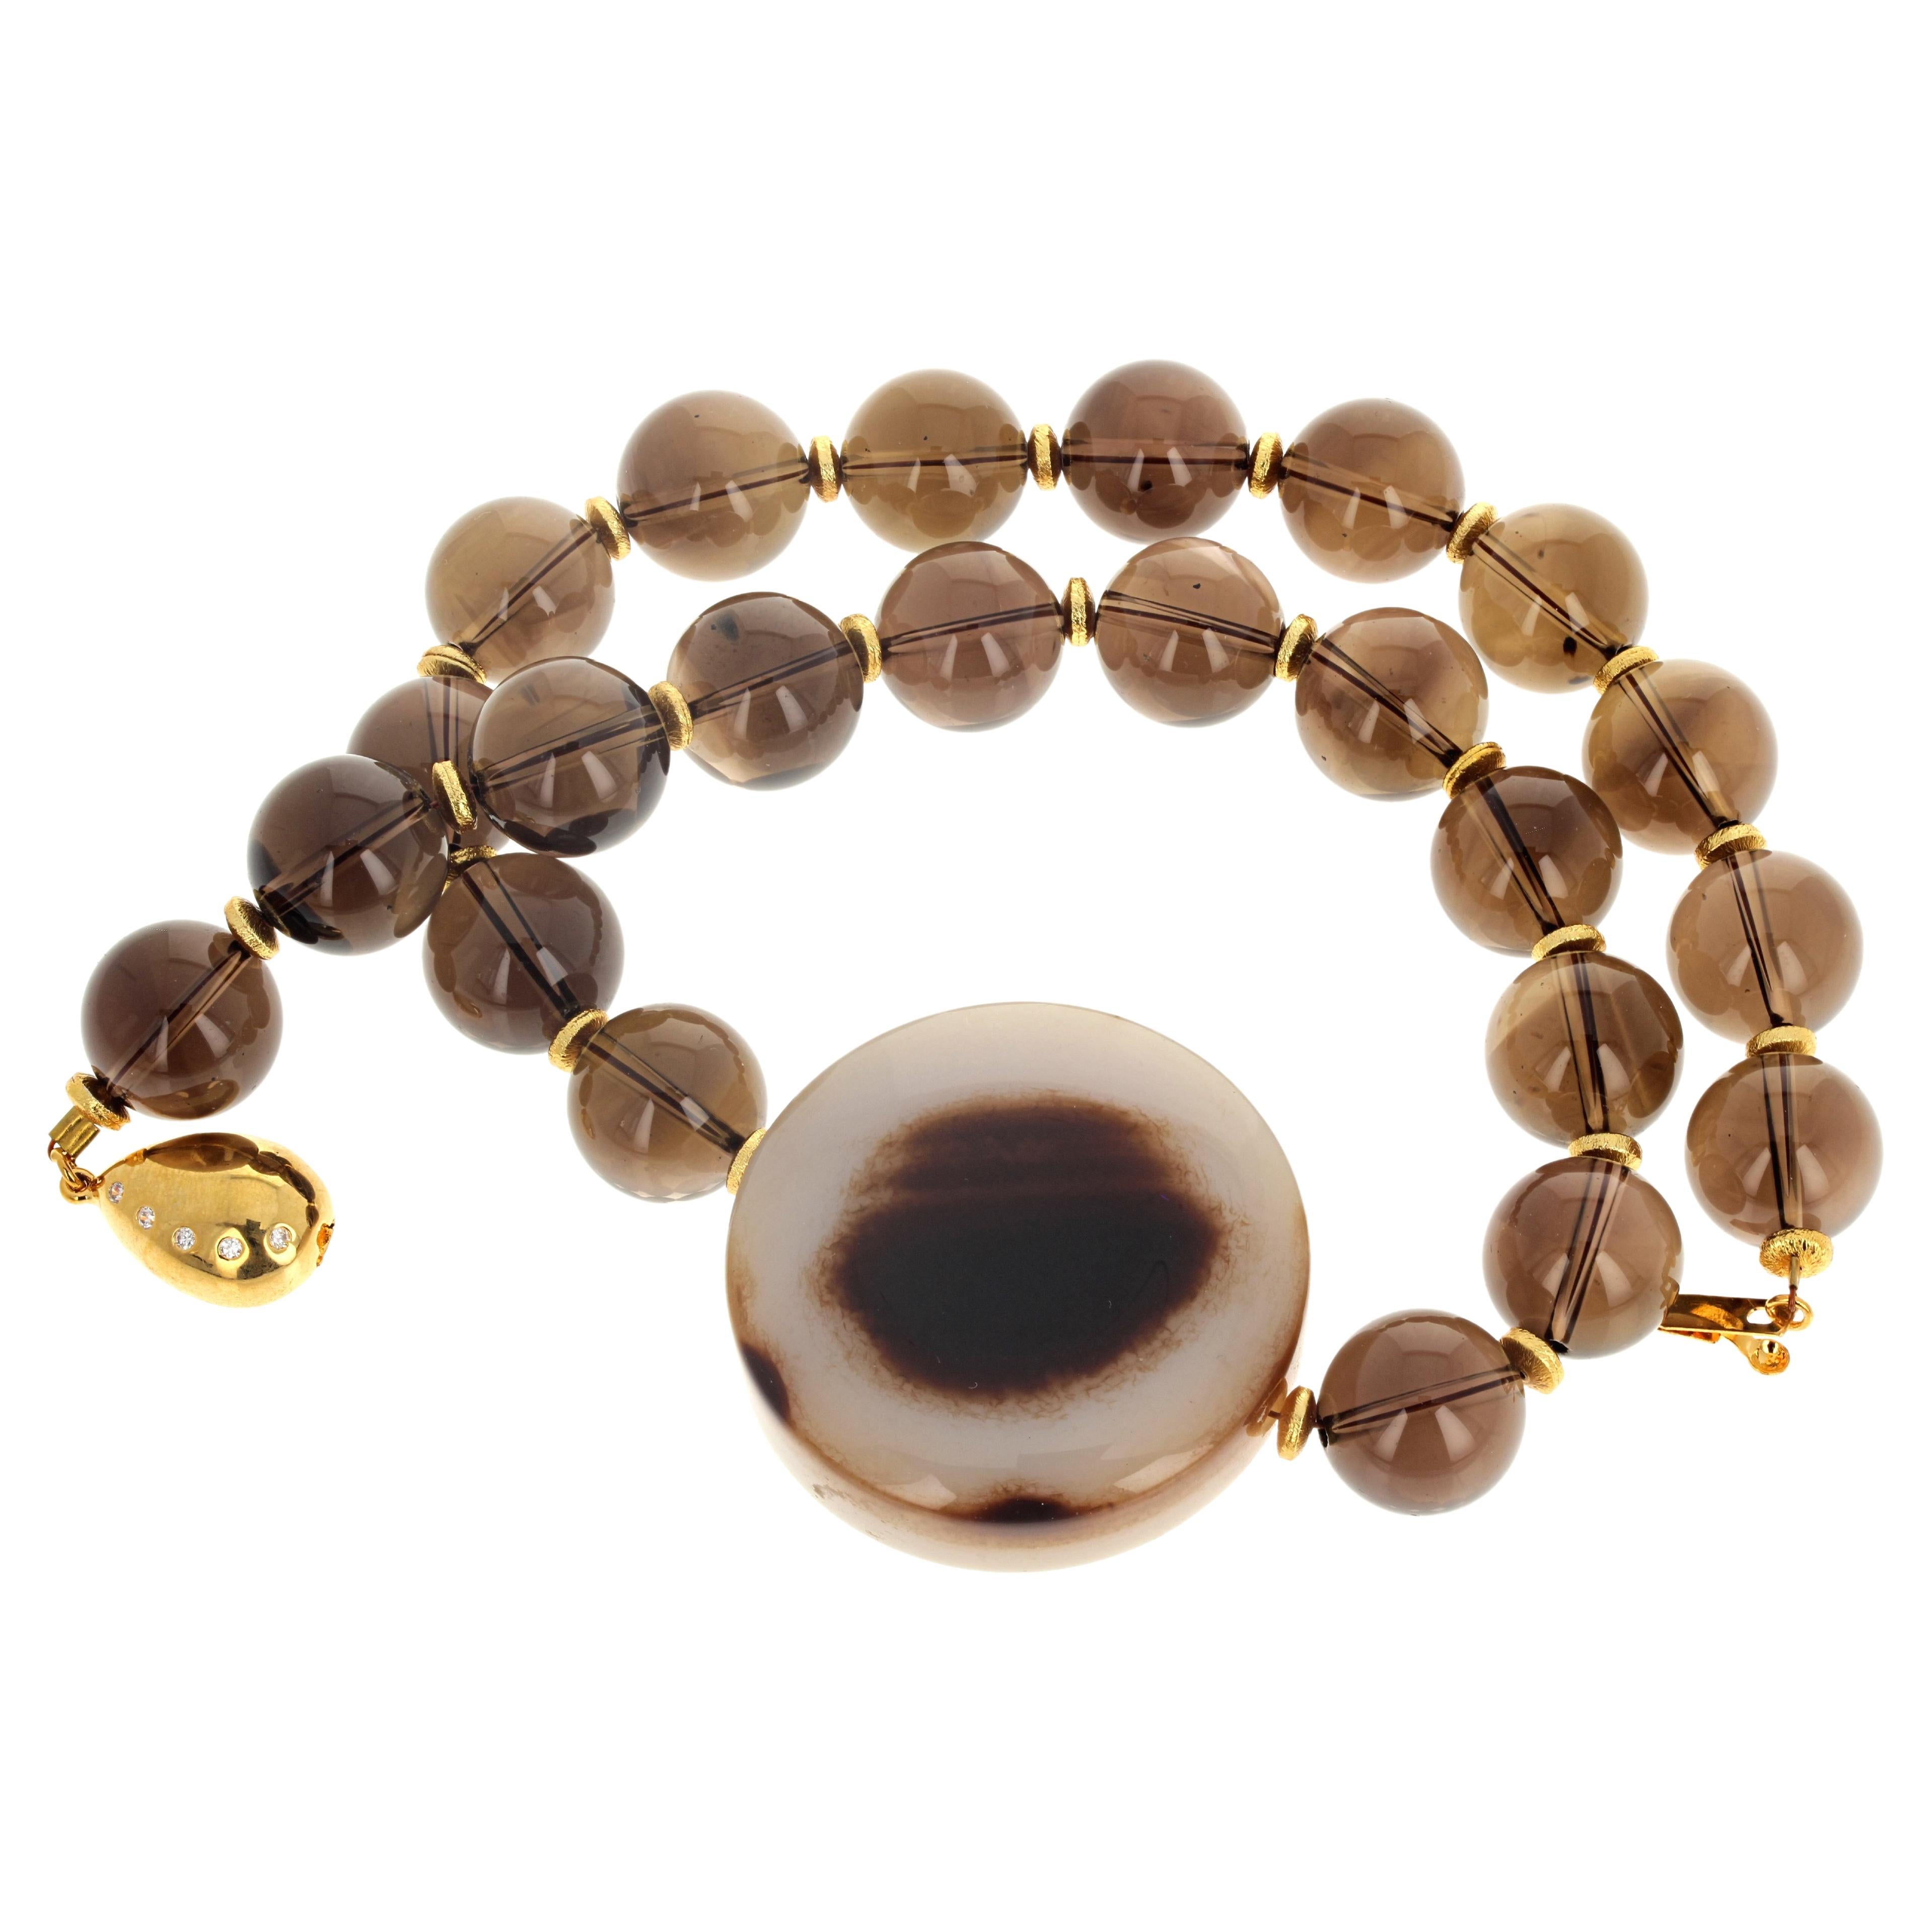  This dramatic natural intense Smoky Quartz (14mm) and beautiful polished natural Agate (40mm) necklace is 17 1/5 inches long enhanced with little gold plated spacers.  The gold plated clasp is an easy to use click in clasp.